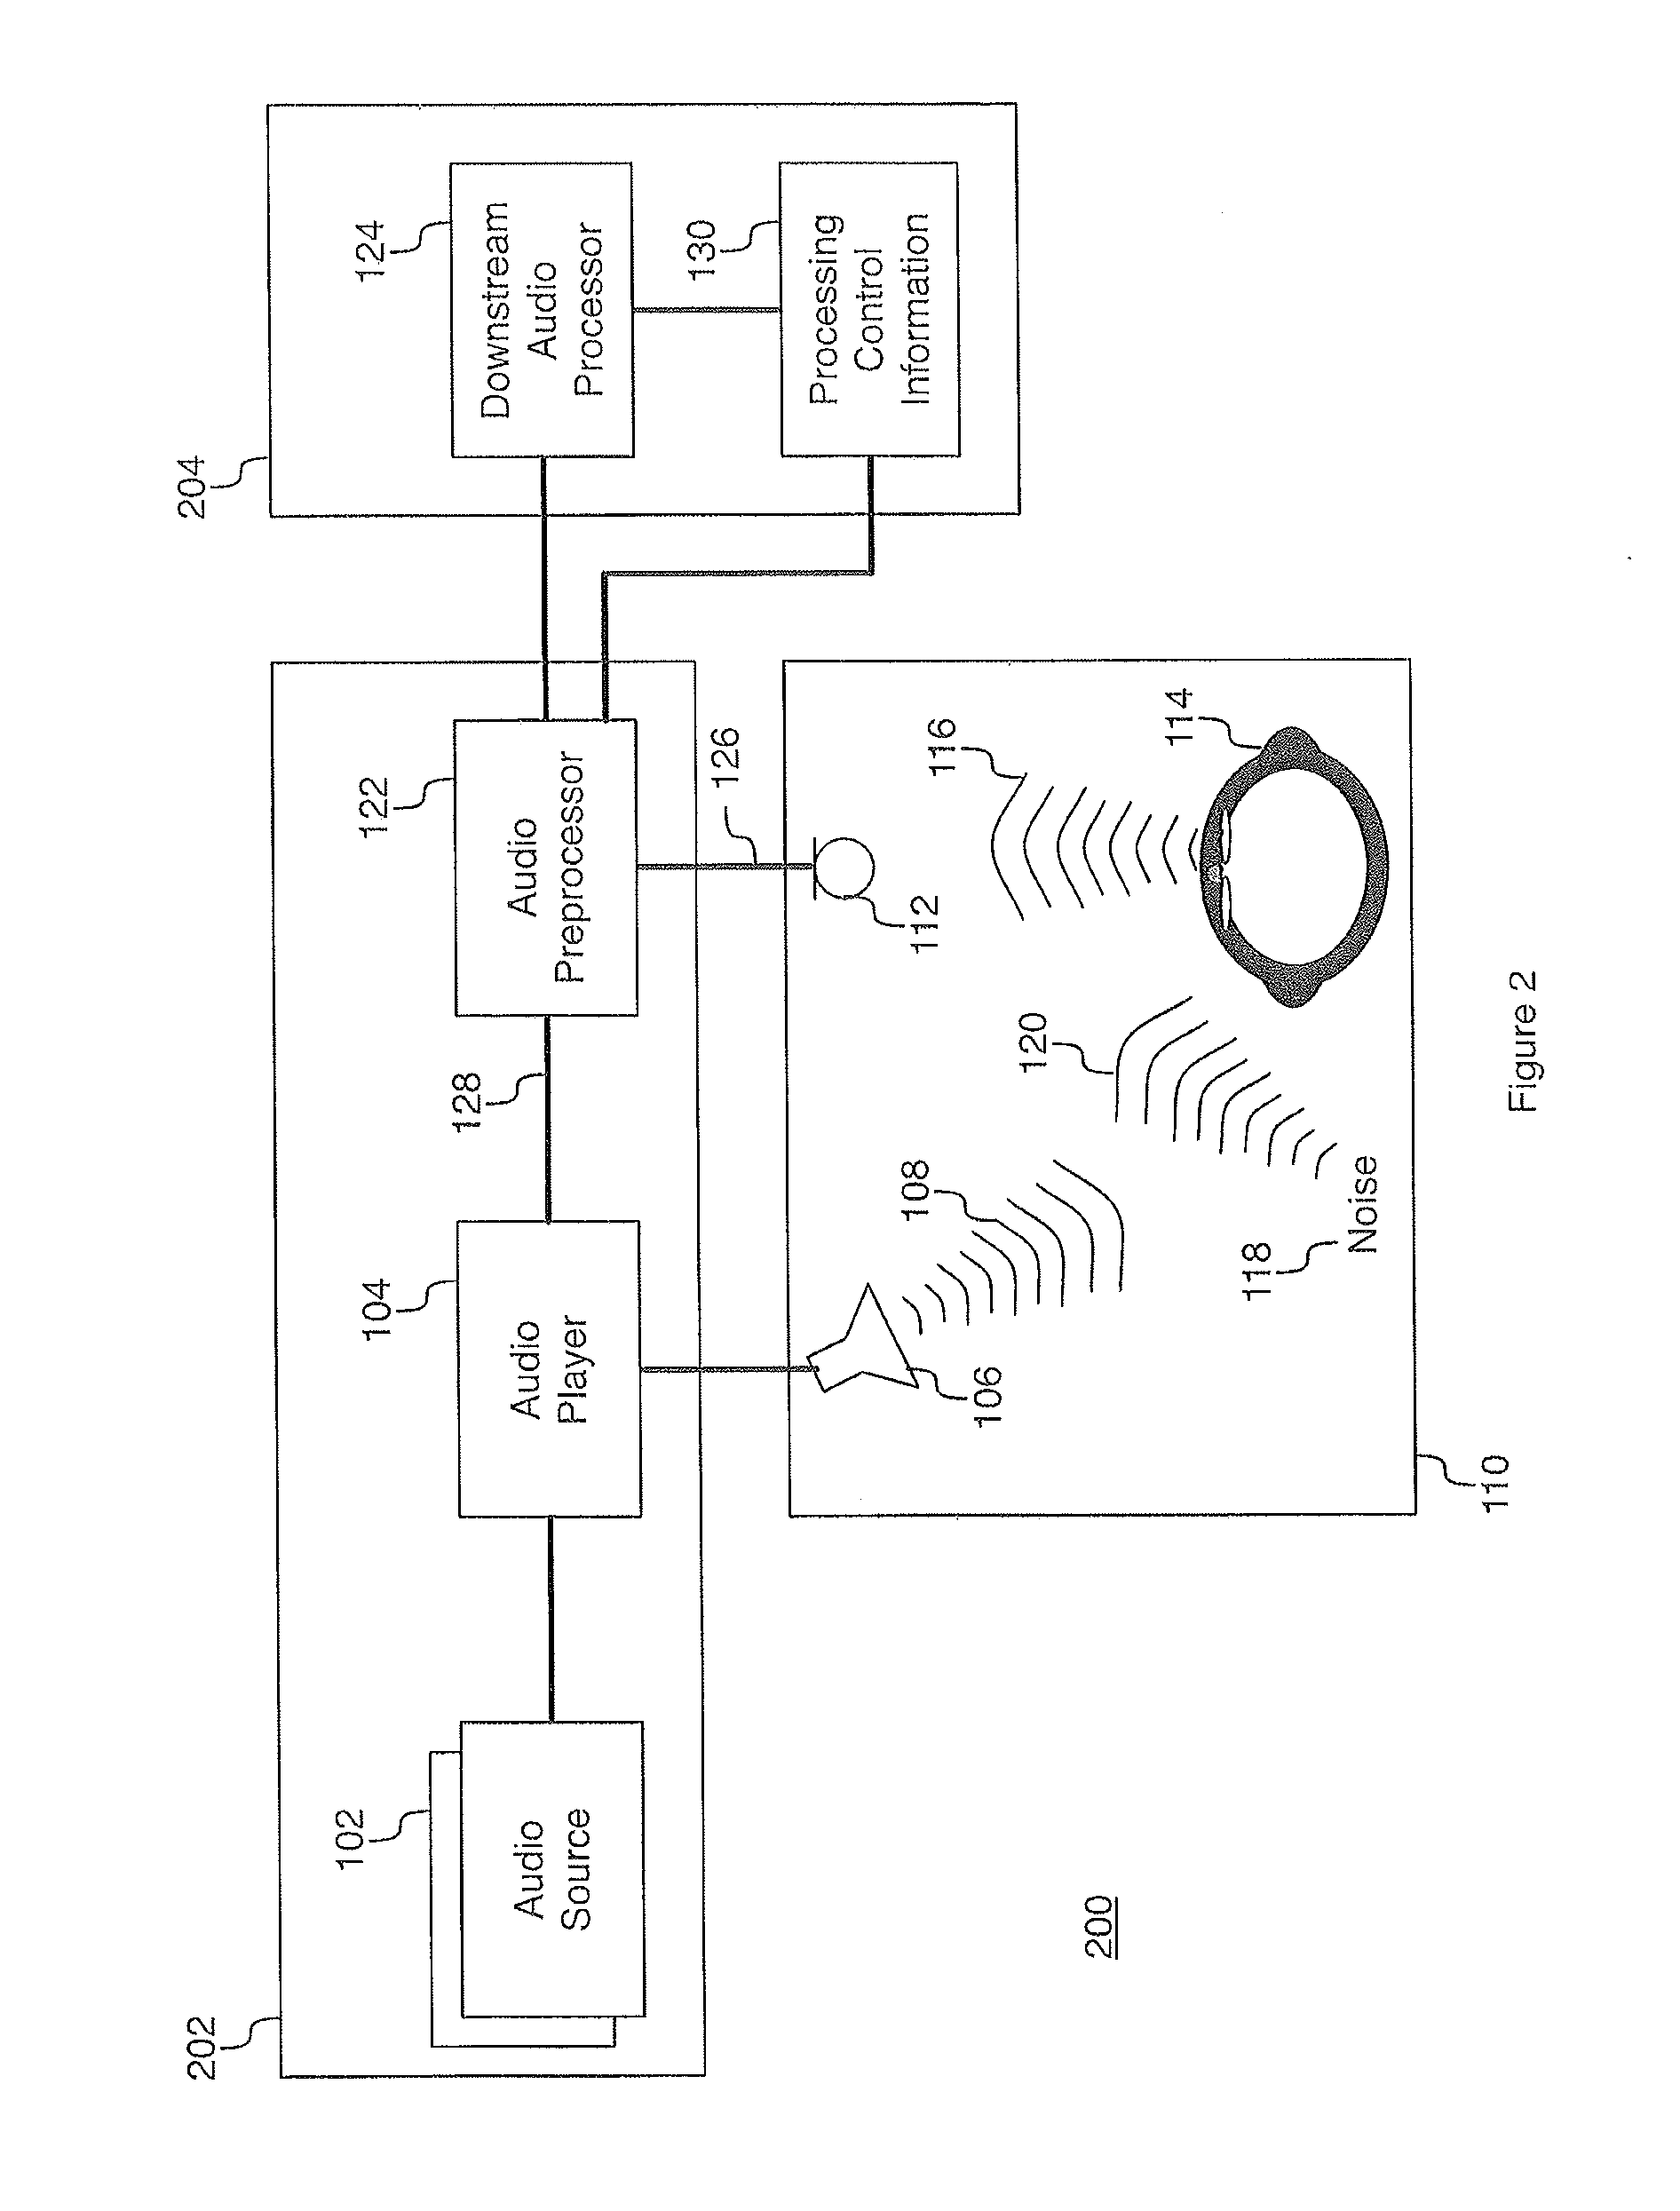 System and method for processing an audio signal captured from a microphone